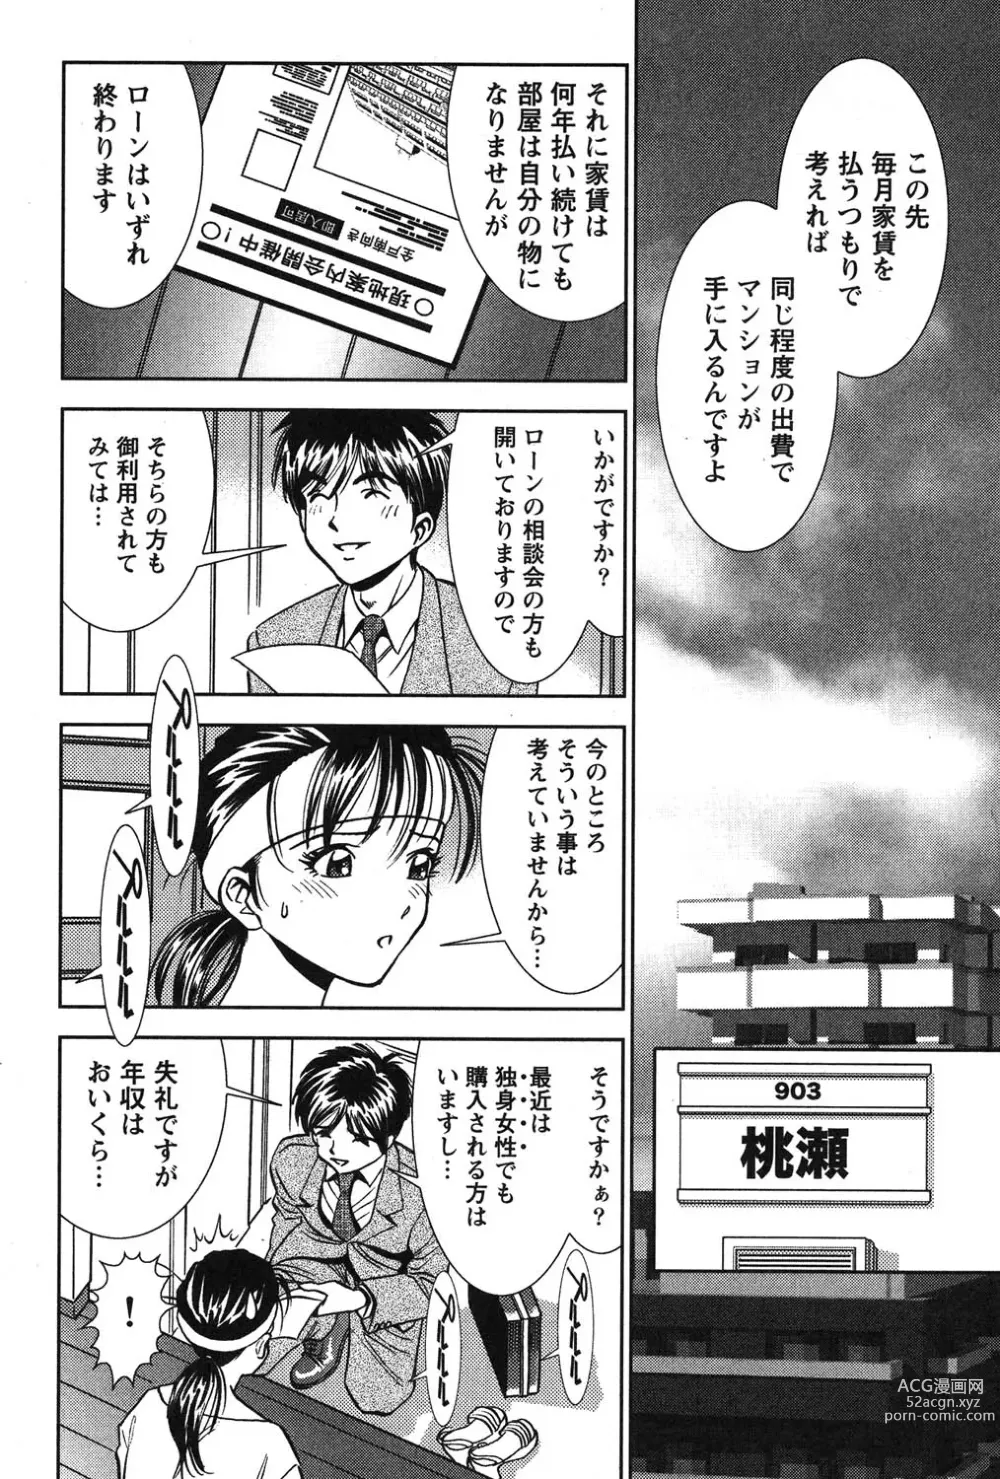 Page 9 of manga Melty Moon Kogetsu Hen - A woman falls in the evening of the moonlight night.